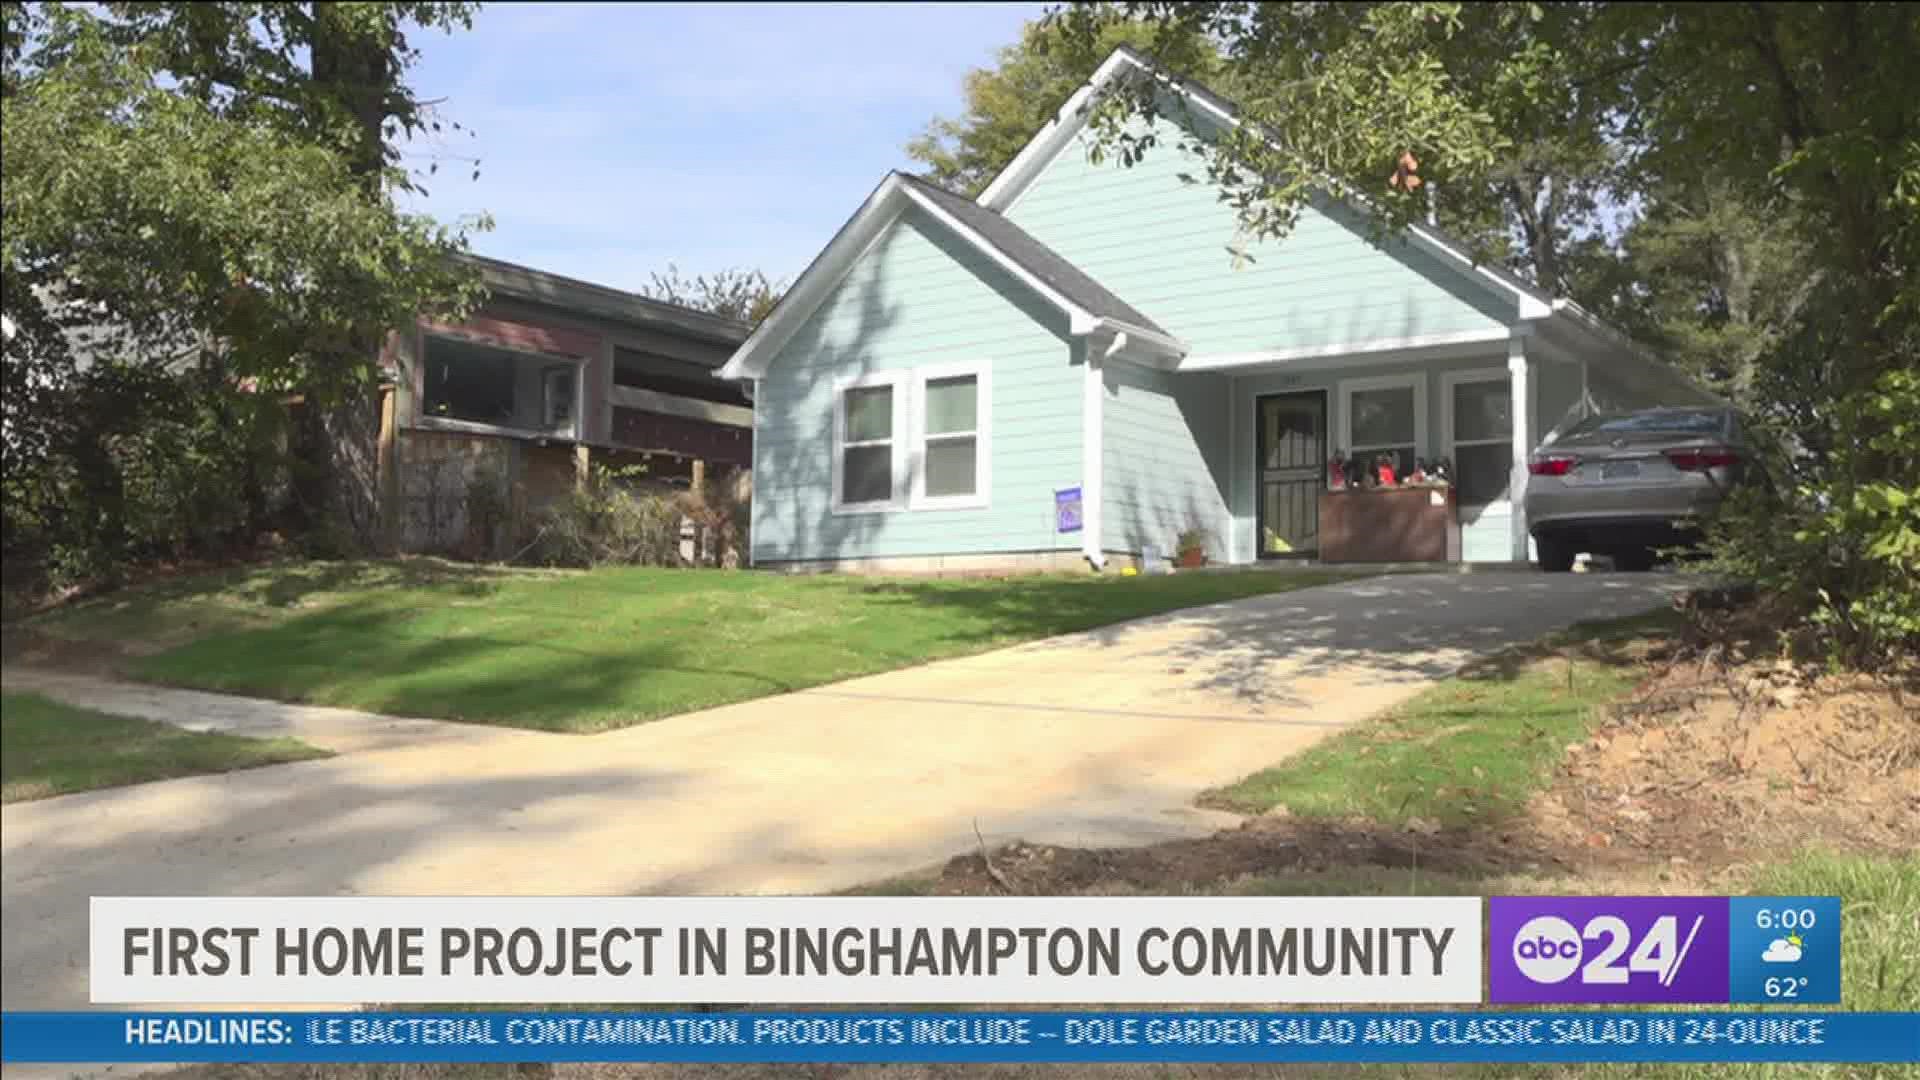 Non-profit aims to create affordable housing in Binghampton.